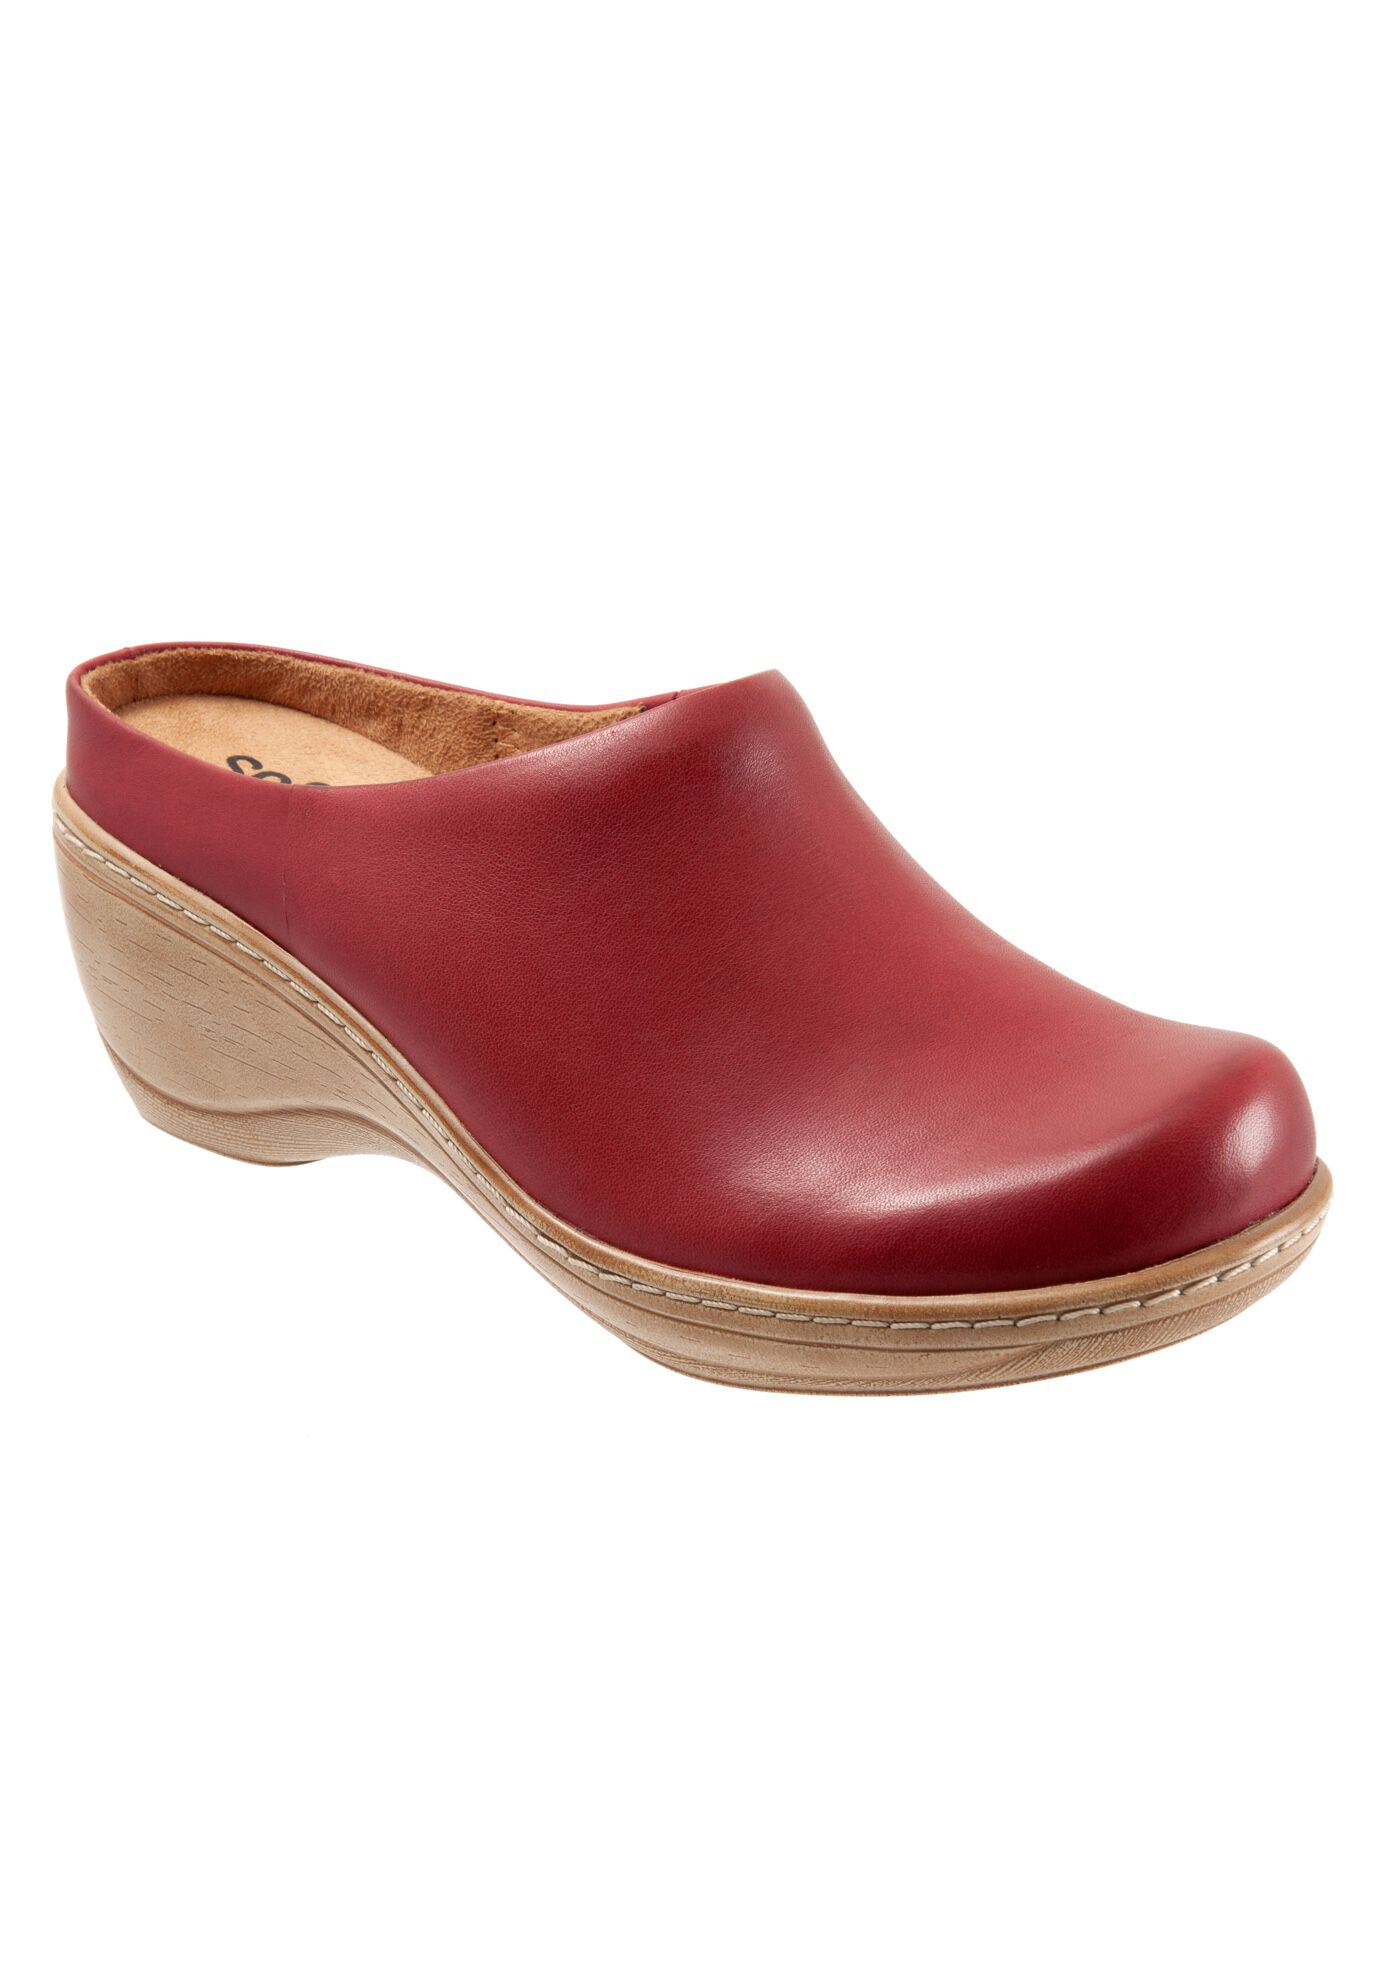 Extra Wide Width Women's Madison Clog by SoftWalk in Dark Red (Size 9 WW)